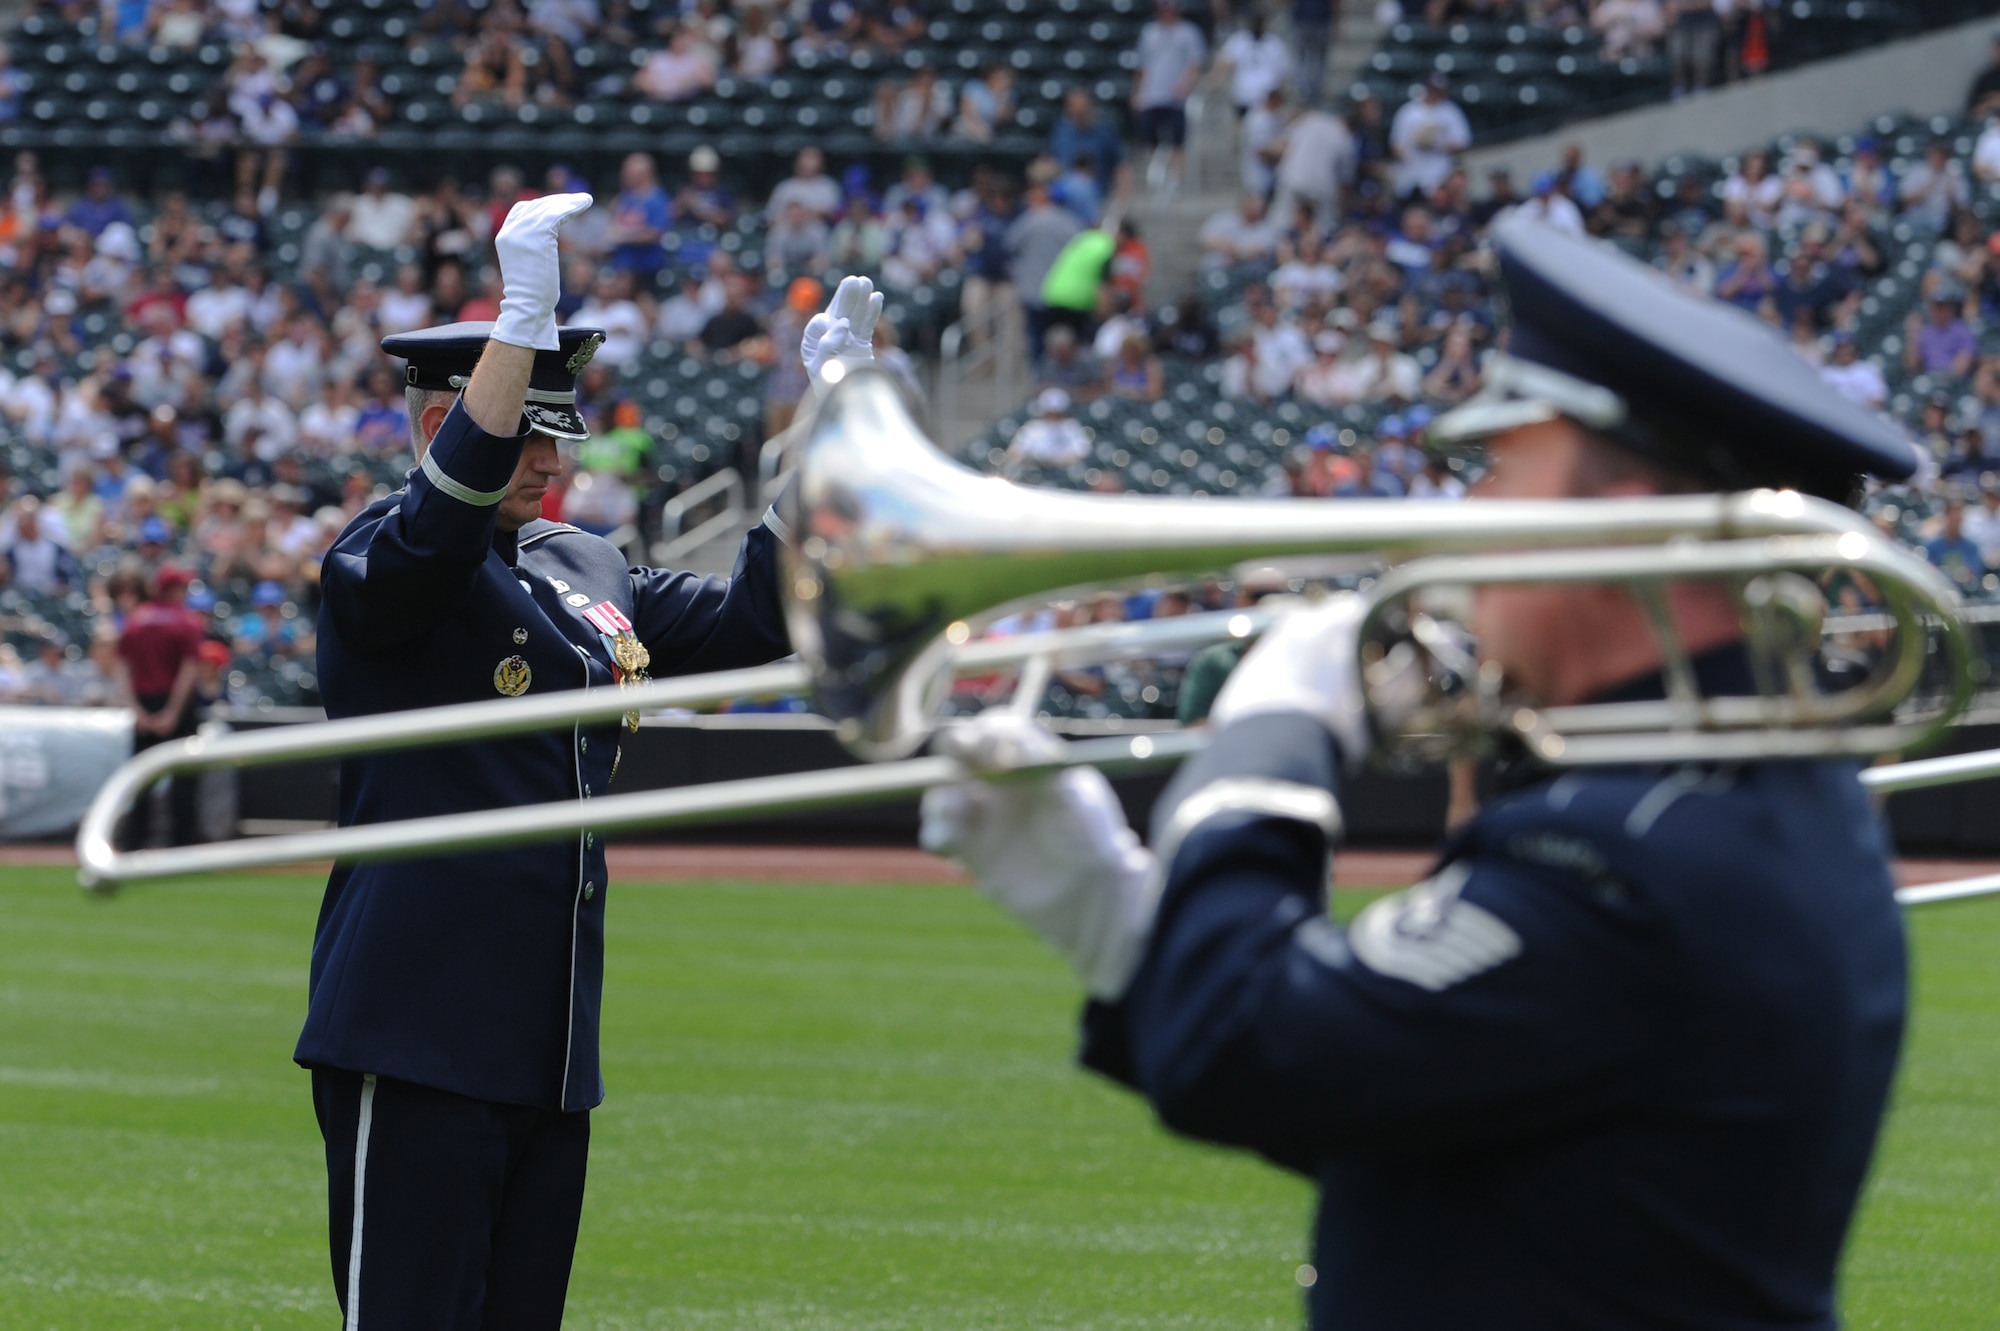 Col. A. Phillip Waite, commander and conductor of The U.S. Air Force Band, leads the ceremonial brass in the opening performance at the Mets vs. Yankees baseball game at Citi Field July 2 in New York.  July 4, 2011, marks the 235th anniversary of America’s break from British rule to create the United States of America. (U.S. Air Force photo by Staff Sgt. Christopher Ruano)